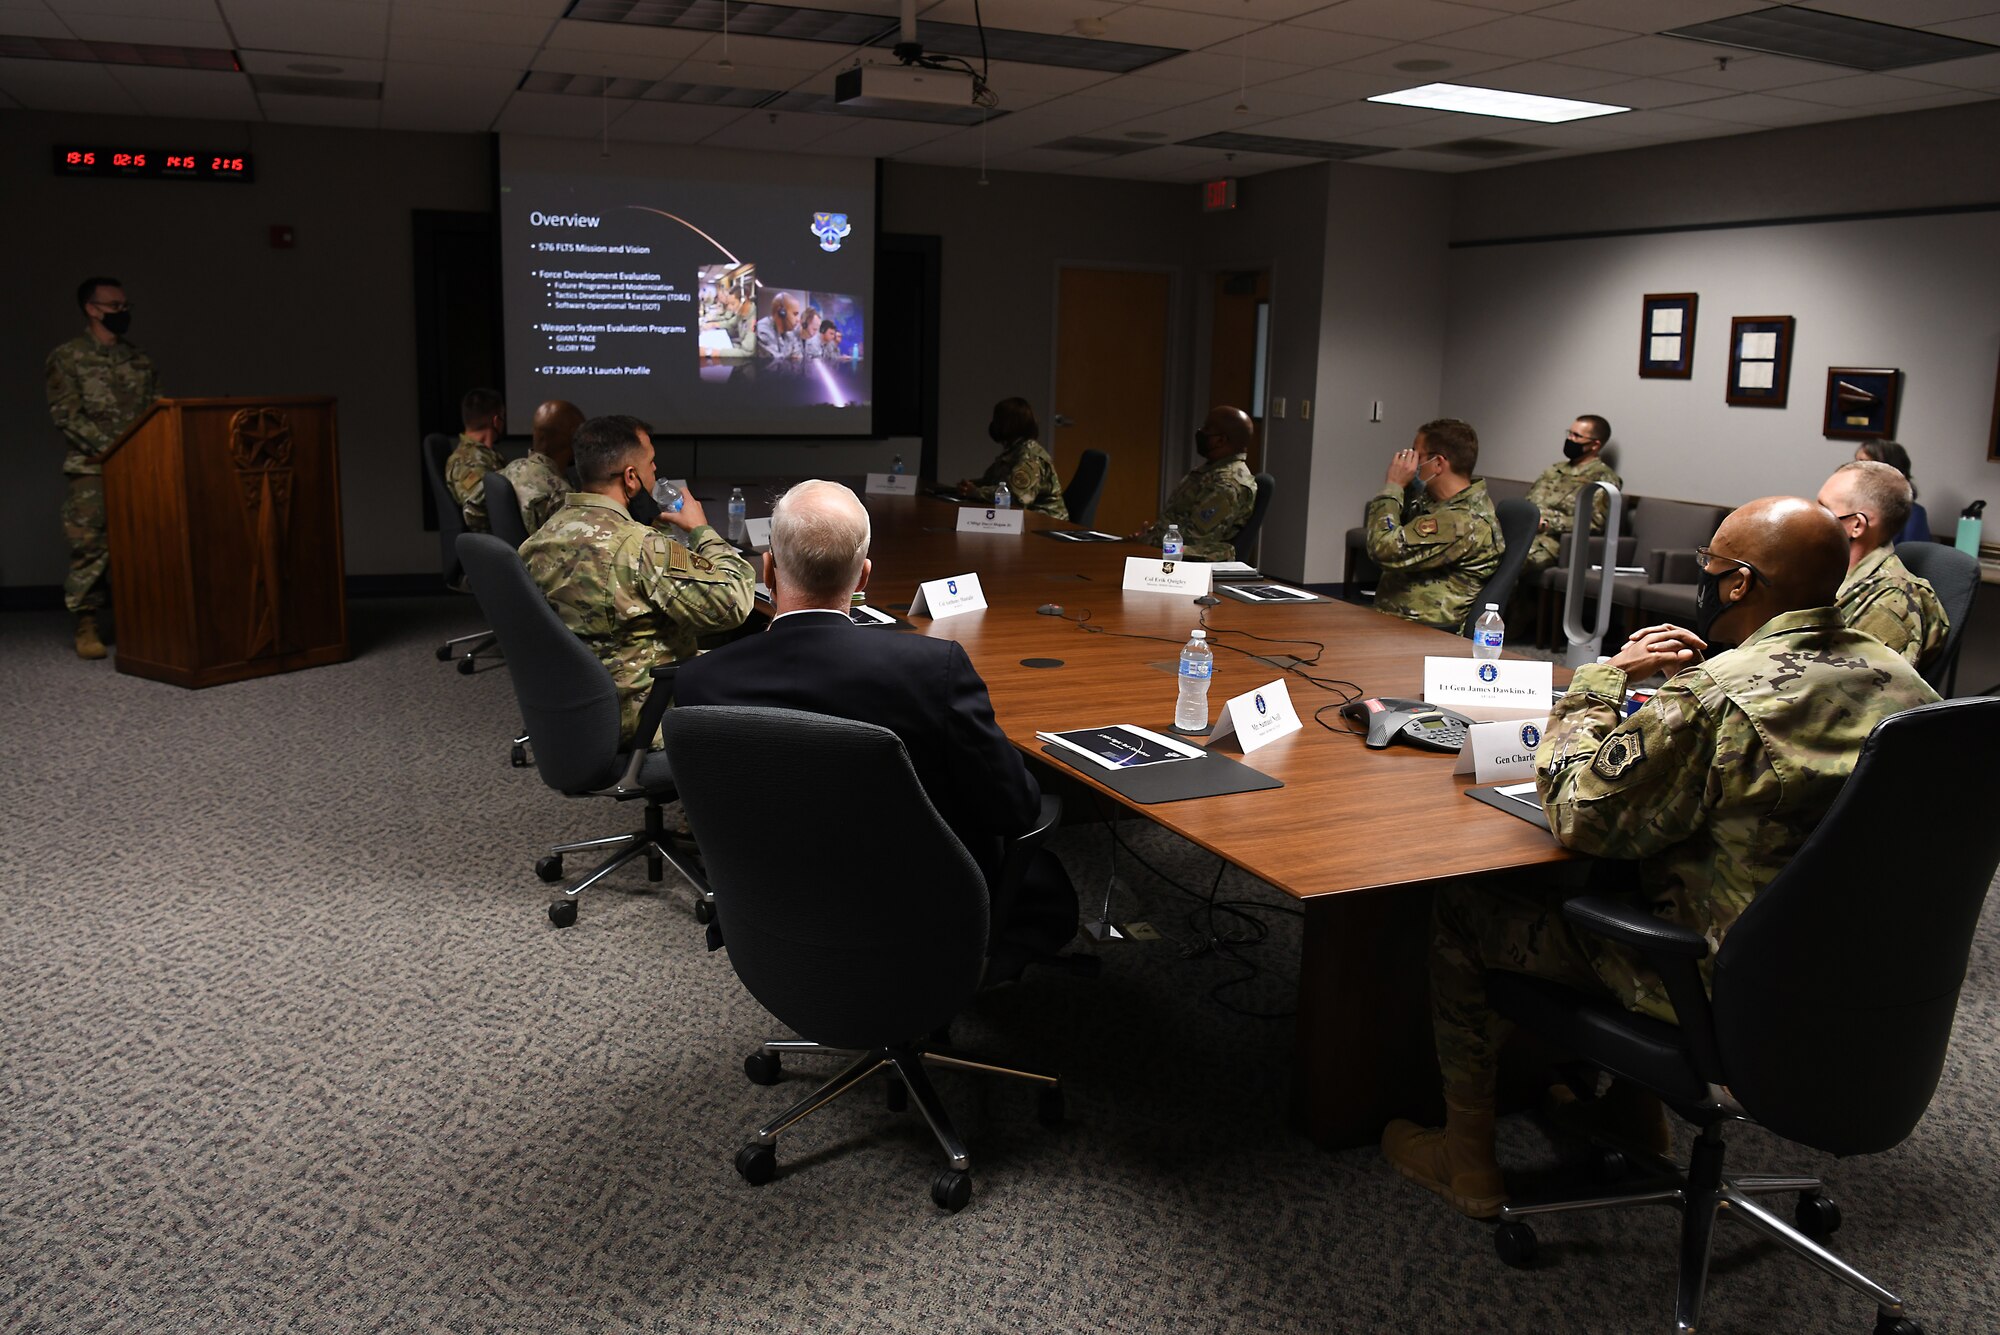 U.S Air Force Chief of Staff Gen. Charles Q. Brown, Jr., receives a mission overview brief from members of the 576th Flight Test Squadron about the Minuteman III intercontinental ballistic missile test launch during a base visit Oct. 27, 2020, at Vandenberg Air Force Base, Calif.